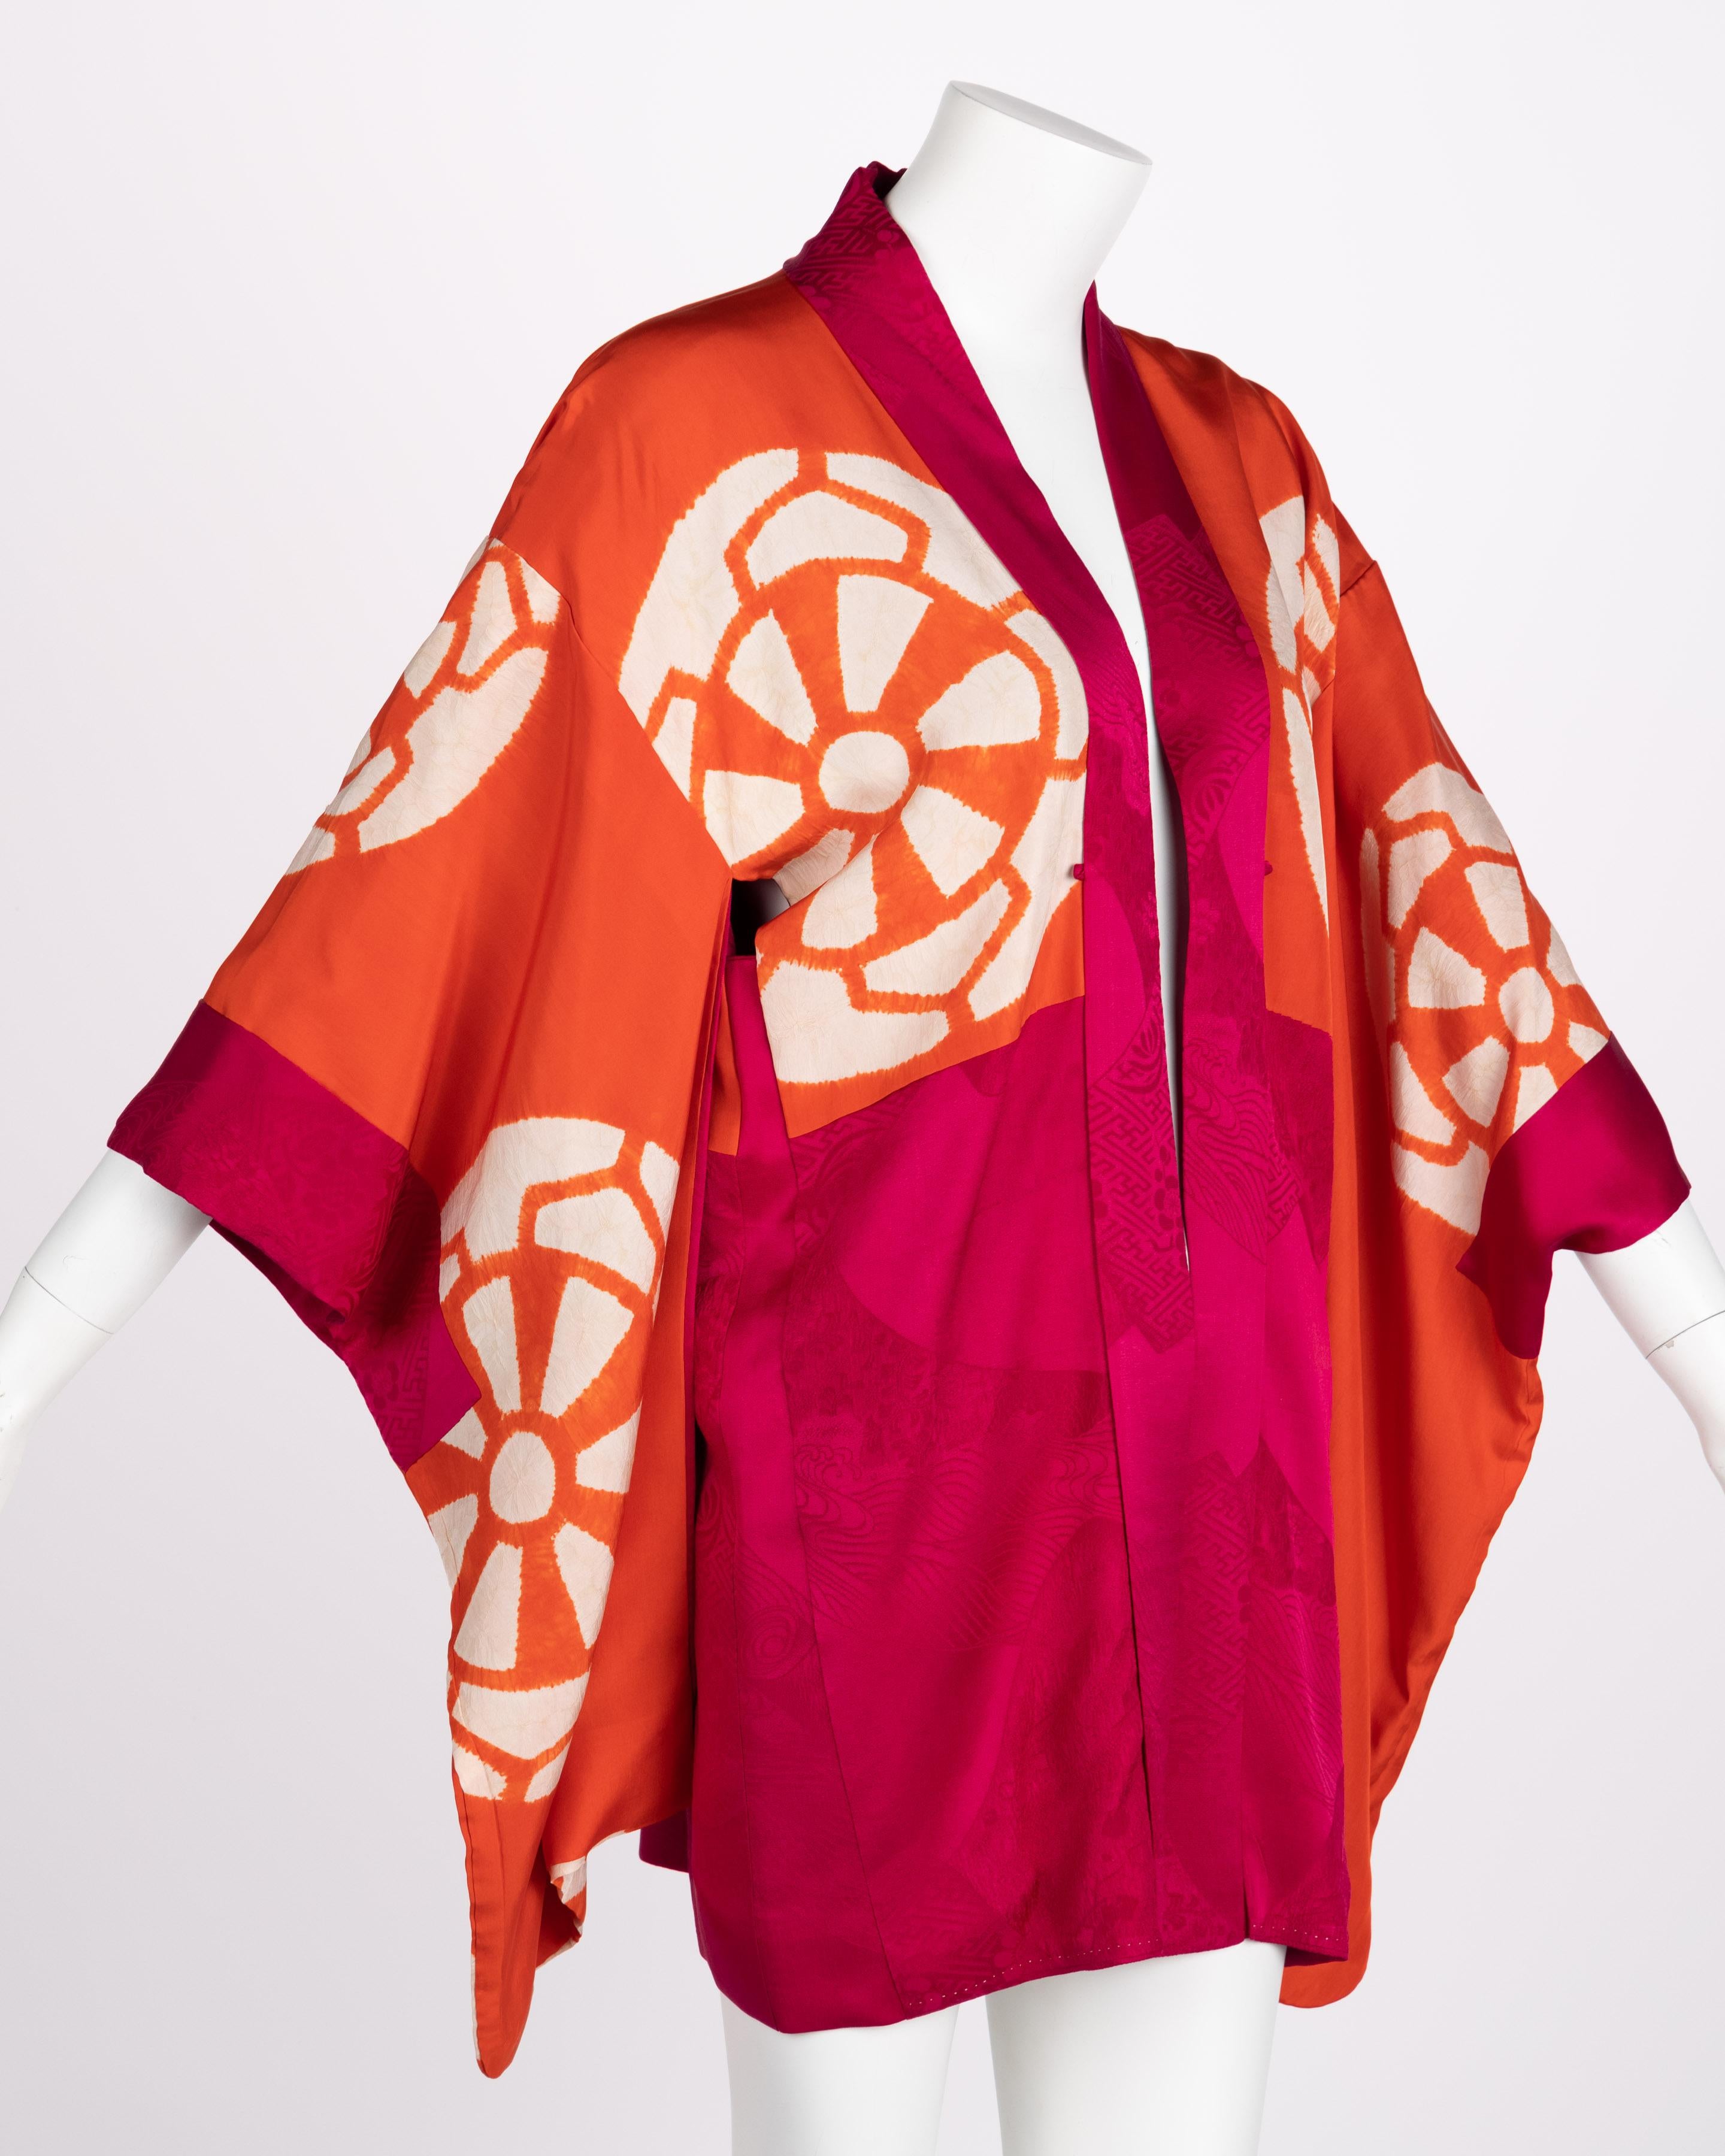 While the variety and particularity of kimono types can be complex, the cut of a kimono is intentionally simple. Minimal seaming allows the beauty of the fabric to reveal itself unencumbered by darts and tucks. A kimono has geometric unity in its